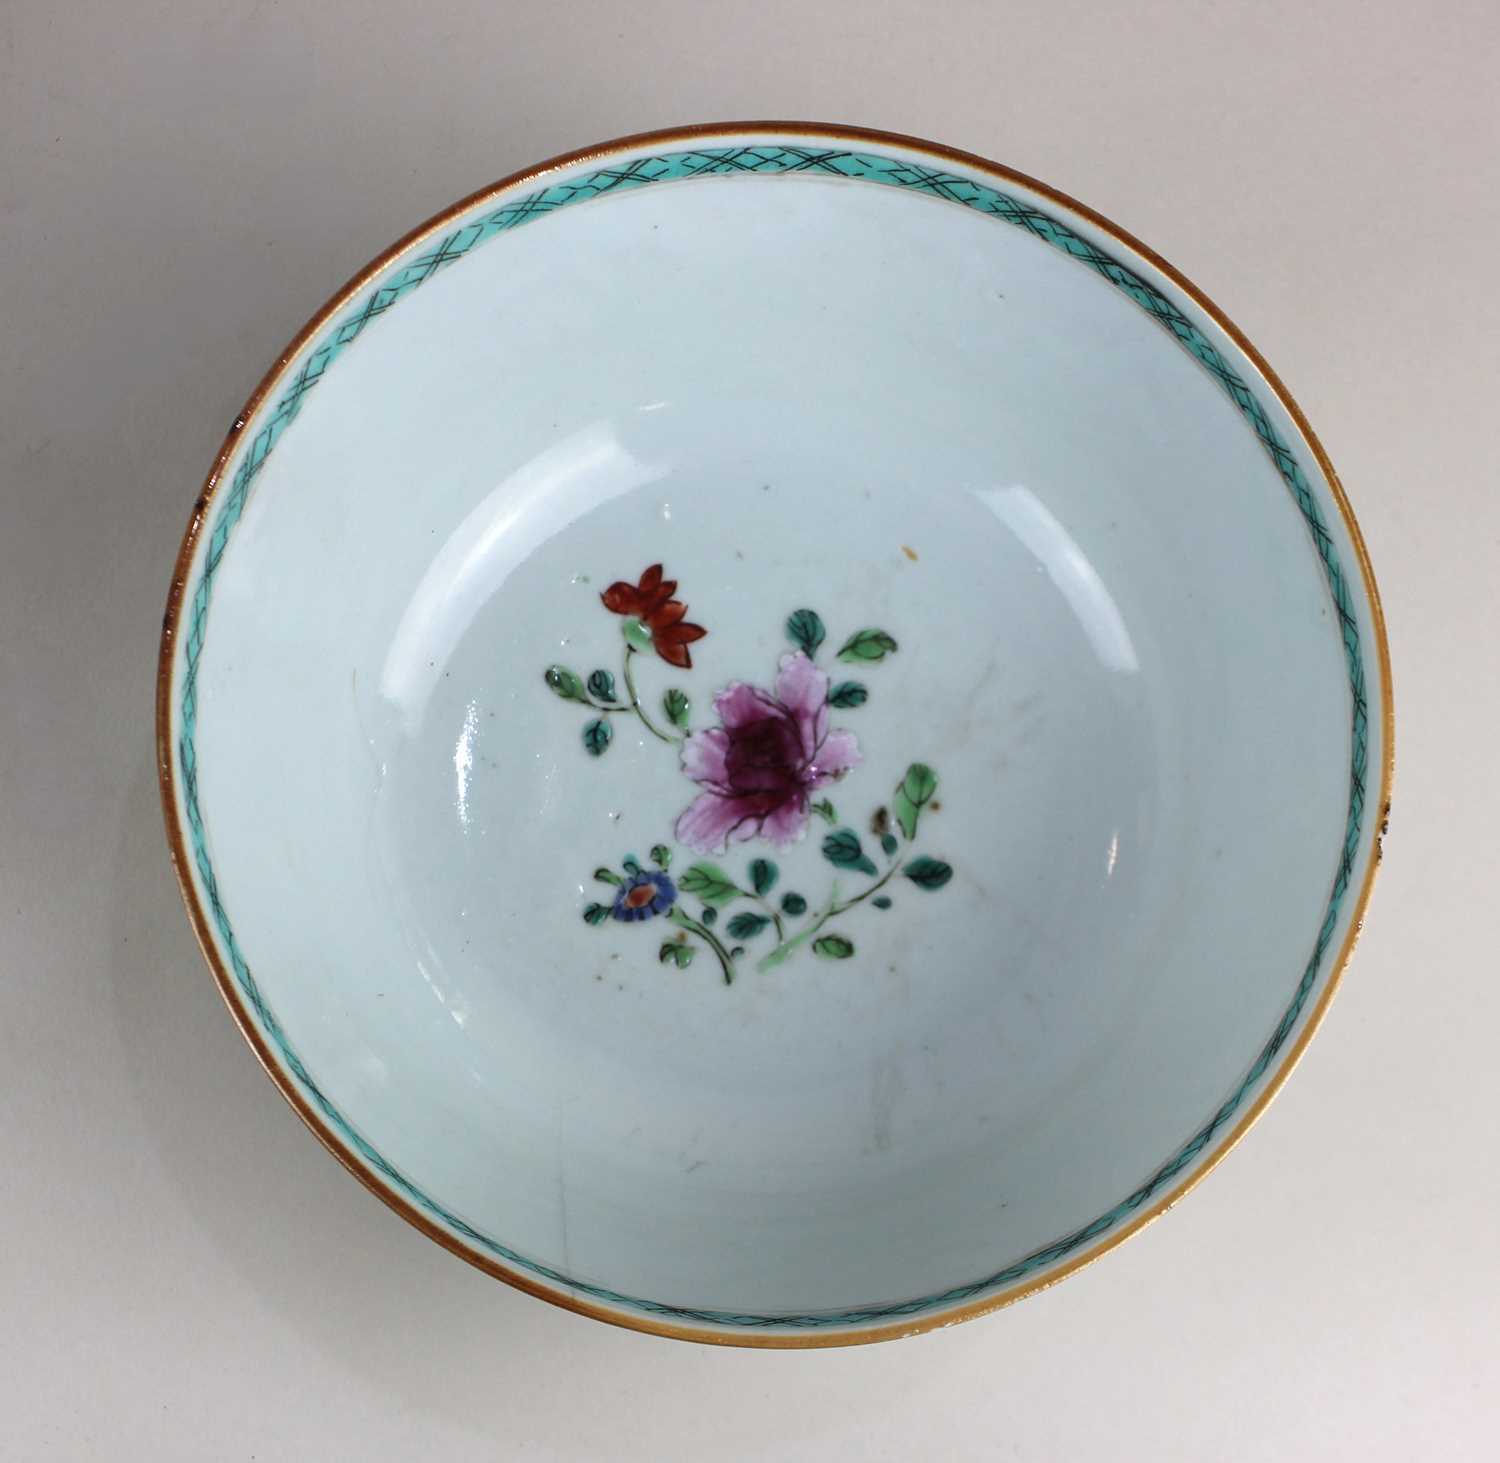 A Chinese porcelain bowl with floral decoration, green decorative border to rim 19cm diameter (a/f) - Image 2 of 2